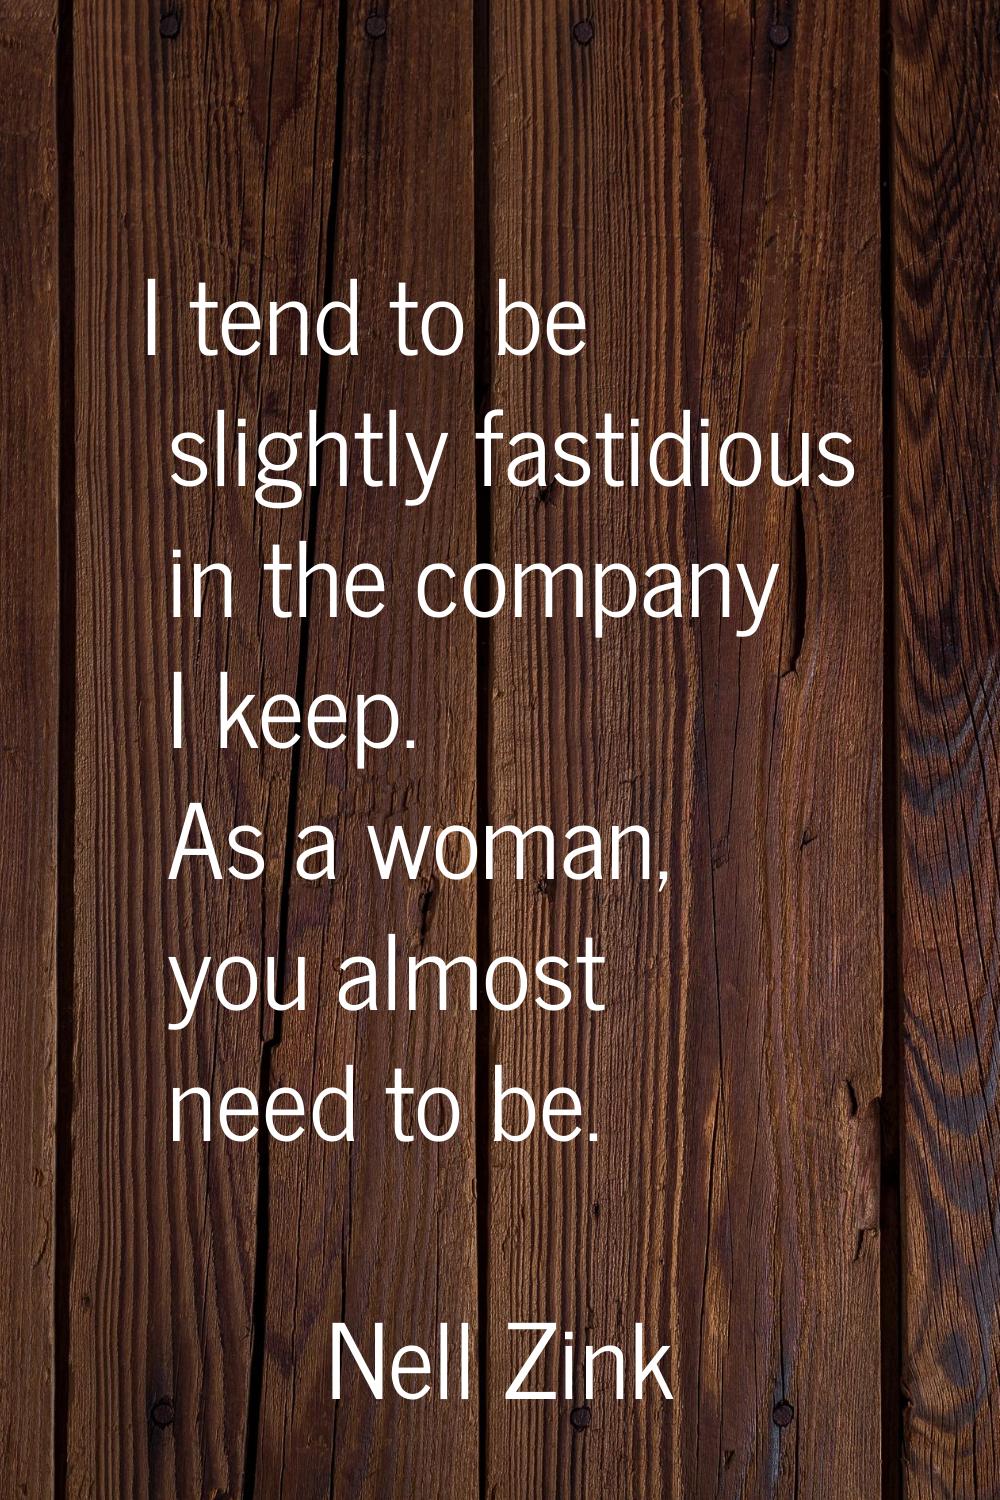 I tend to be slightly fastidious in the company I keep. As a woman, you almost need to be.